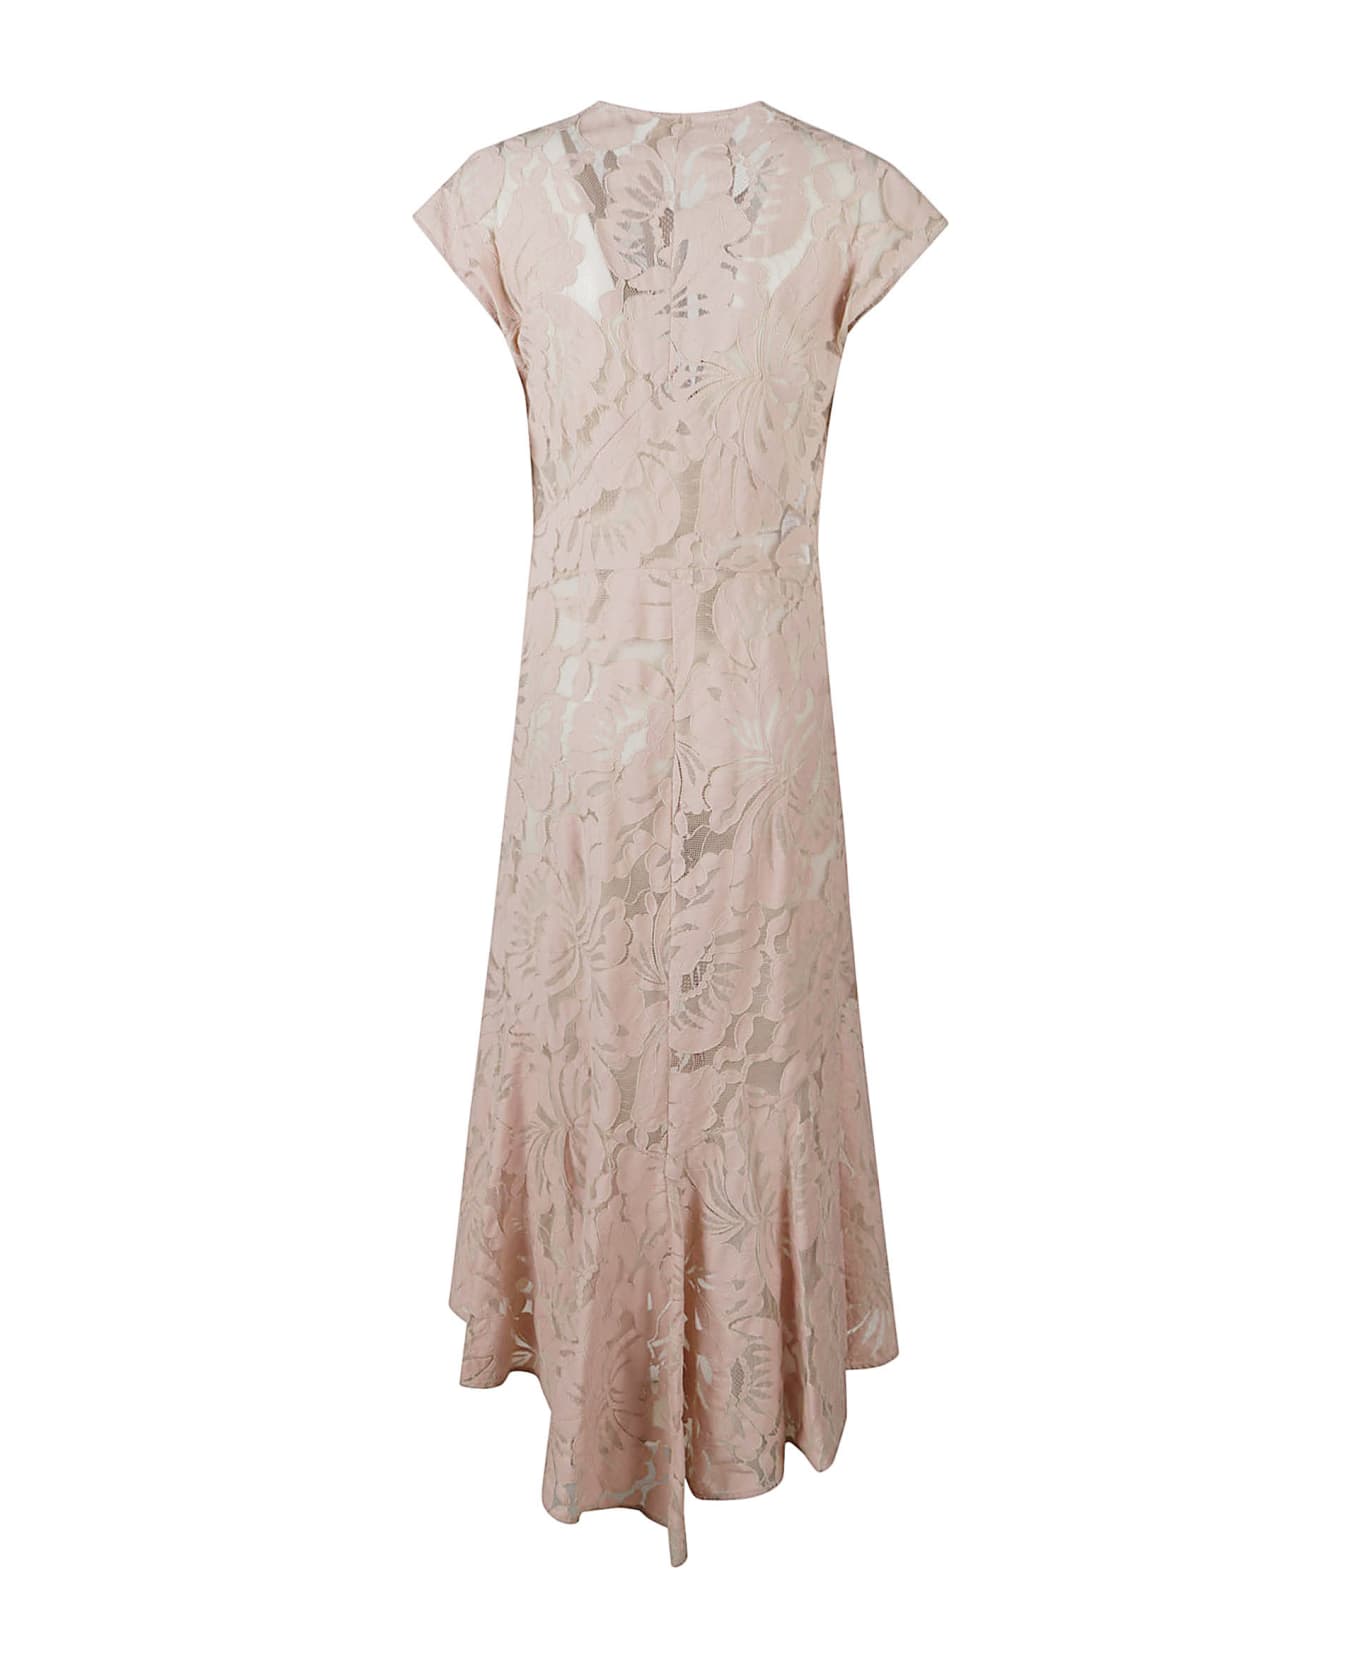 N.21 Lace Floral Sleeveless Dress - CIPRIA